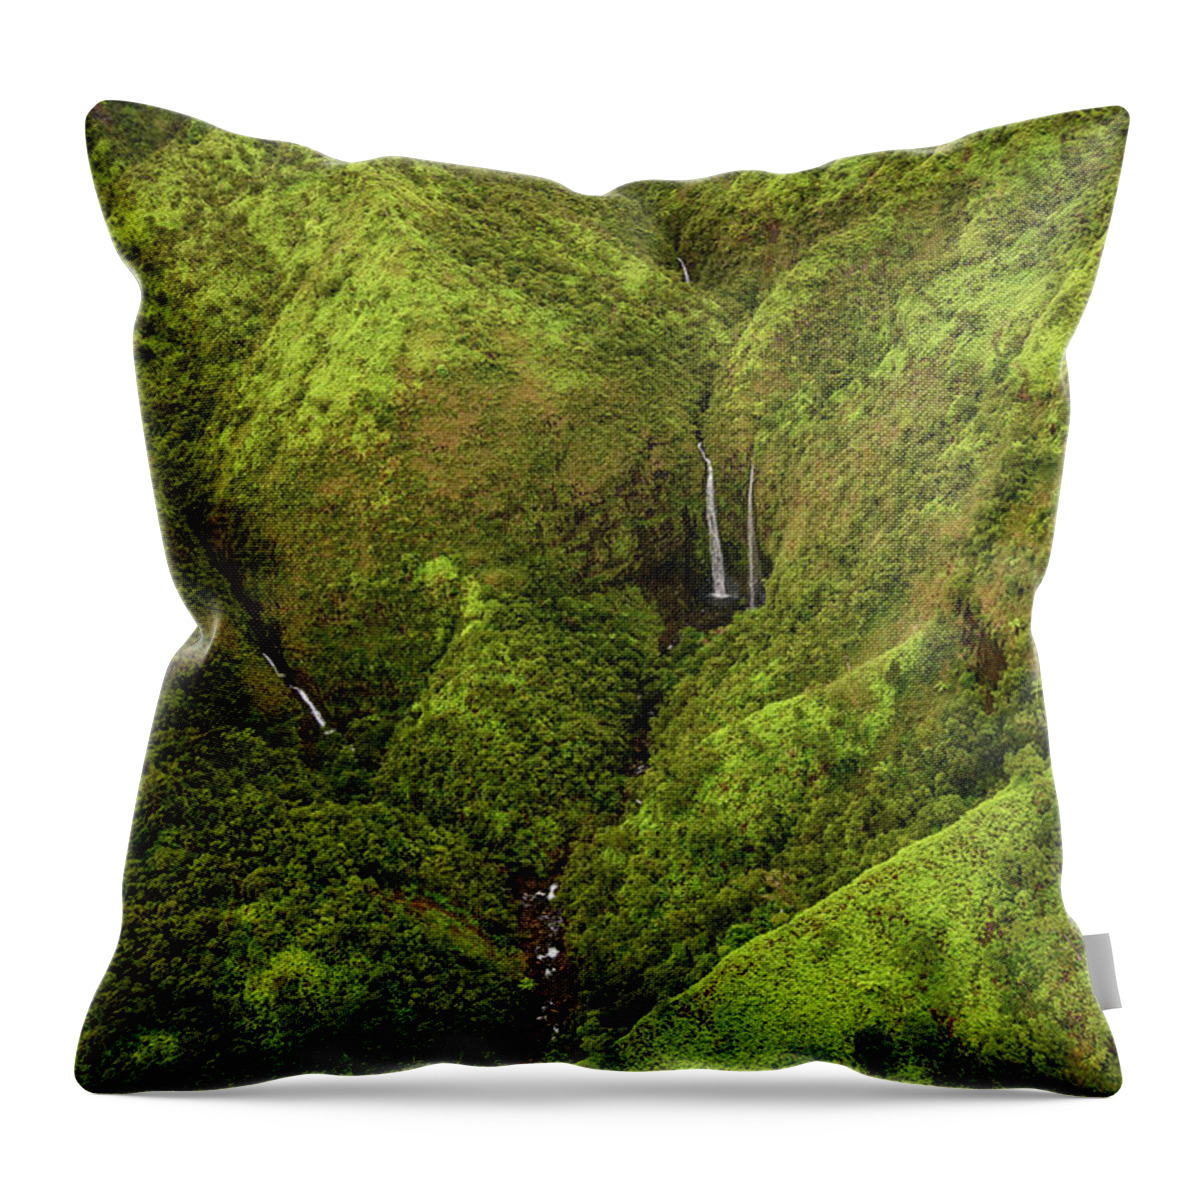 Waialeale Waterfalls Throw Pillow featuring the photograph Wai'ale'ale Falls Four by Steven Sparks